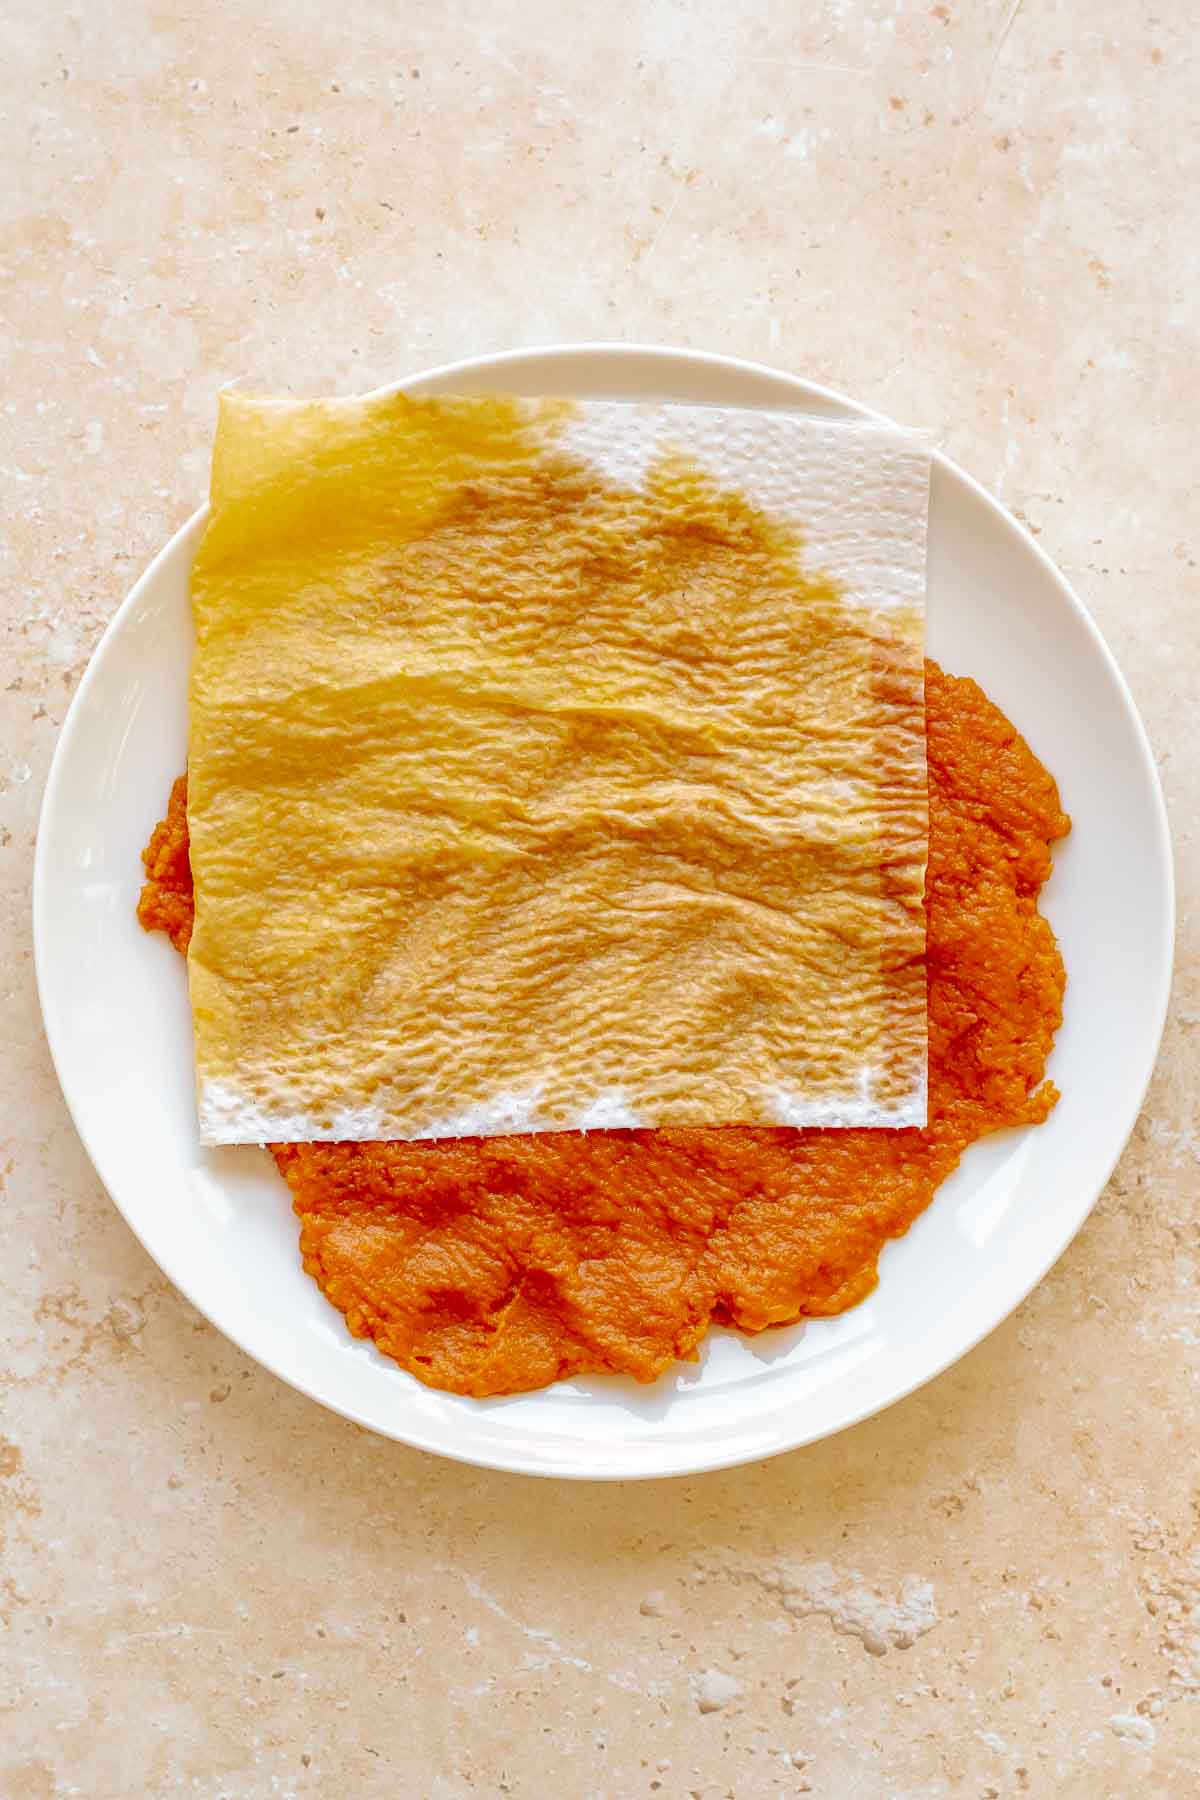 A paper towel presses moisture out of pumpkin puree on a plate.